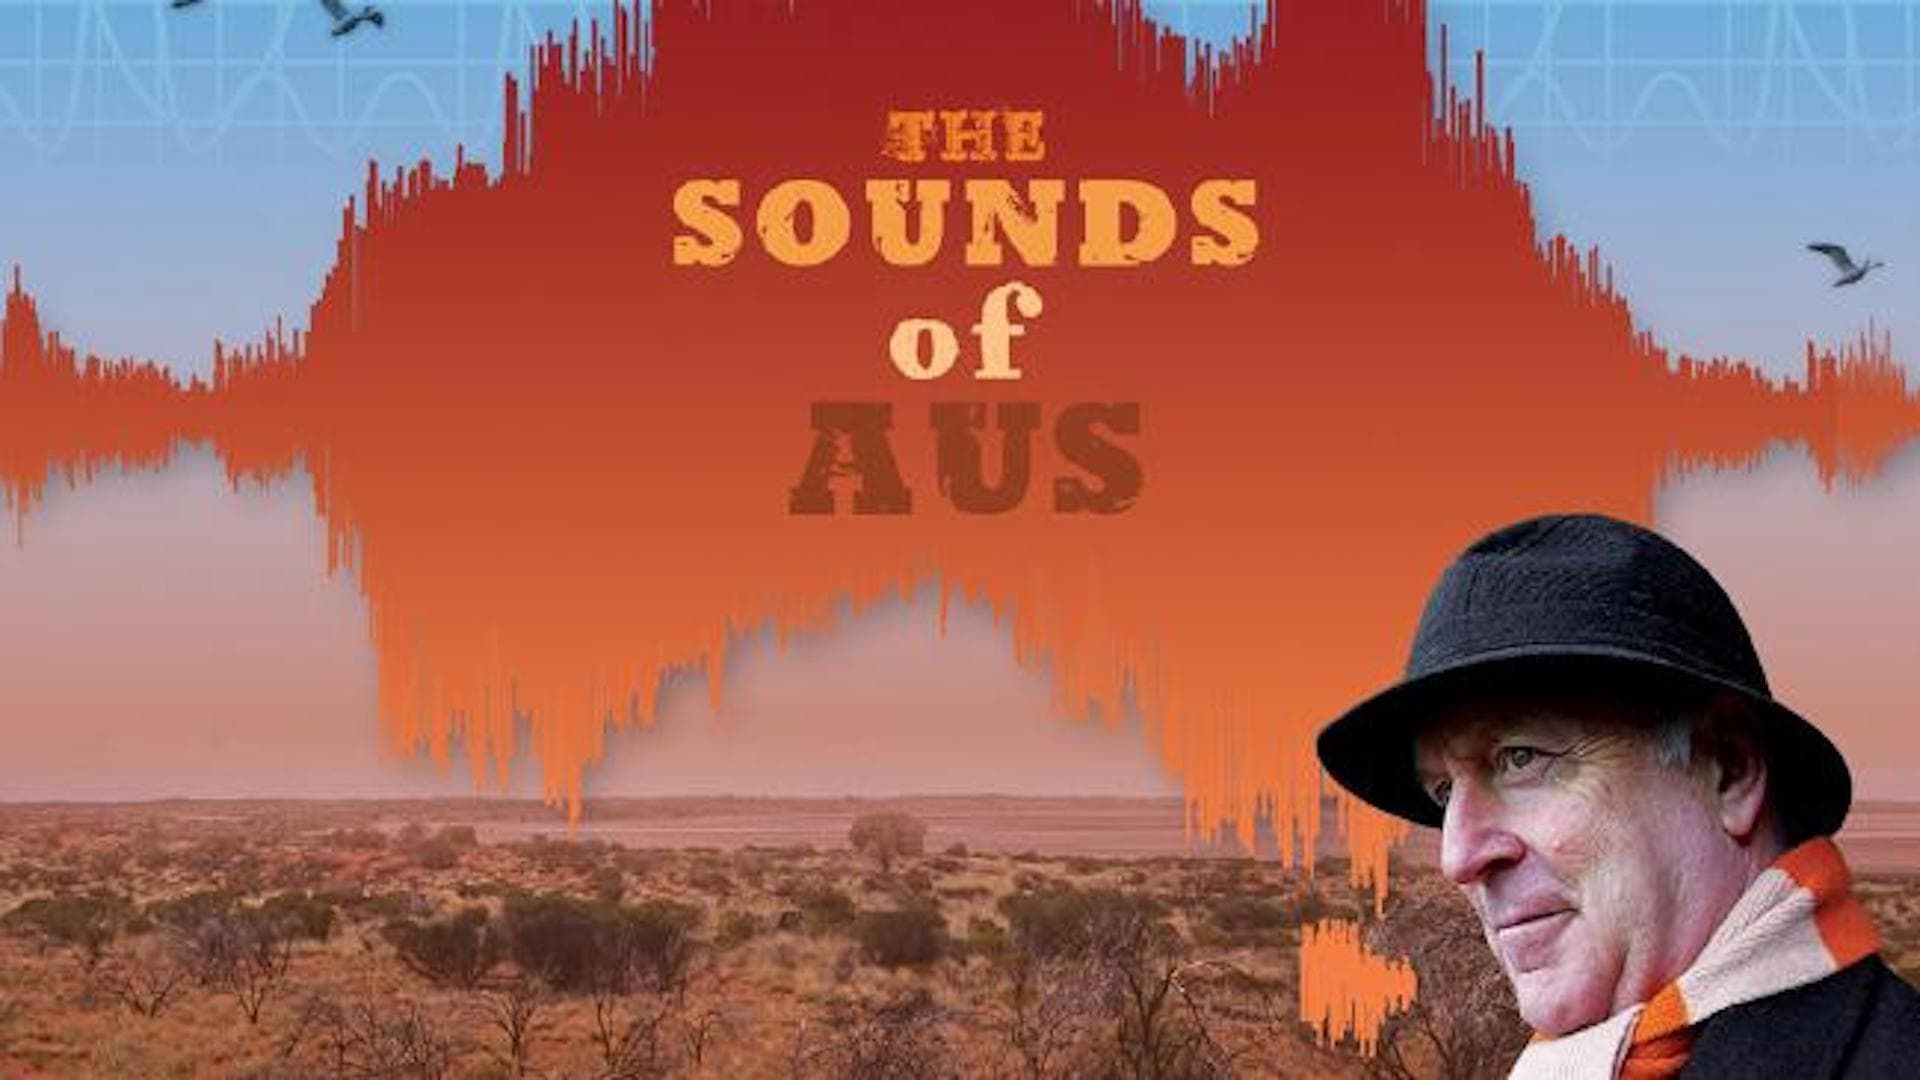 The Sounds of Aus background